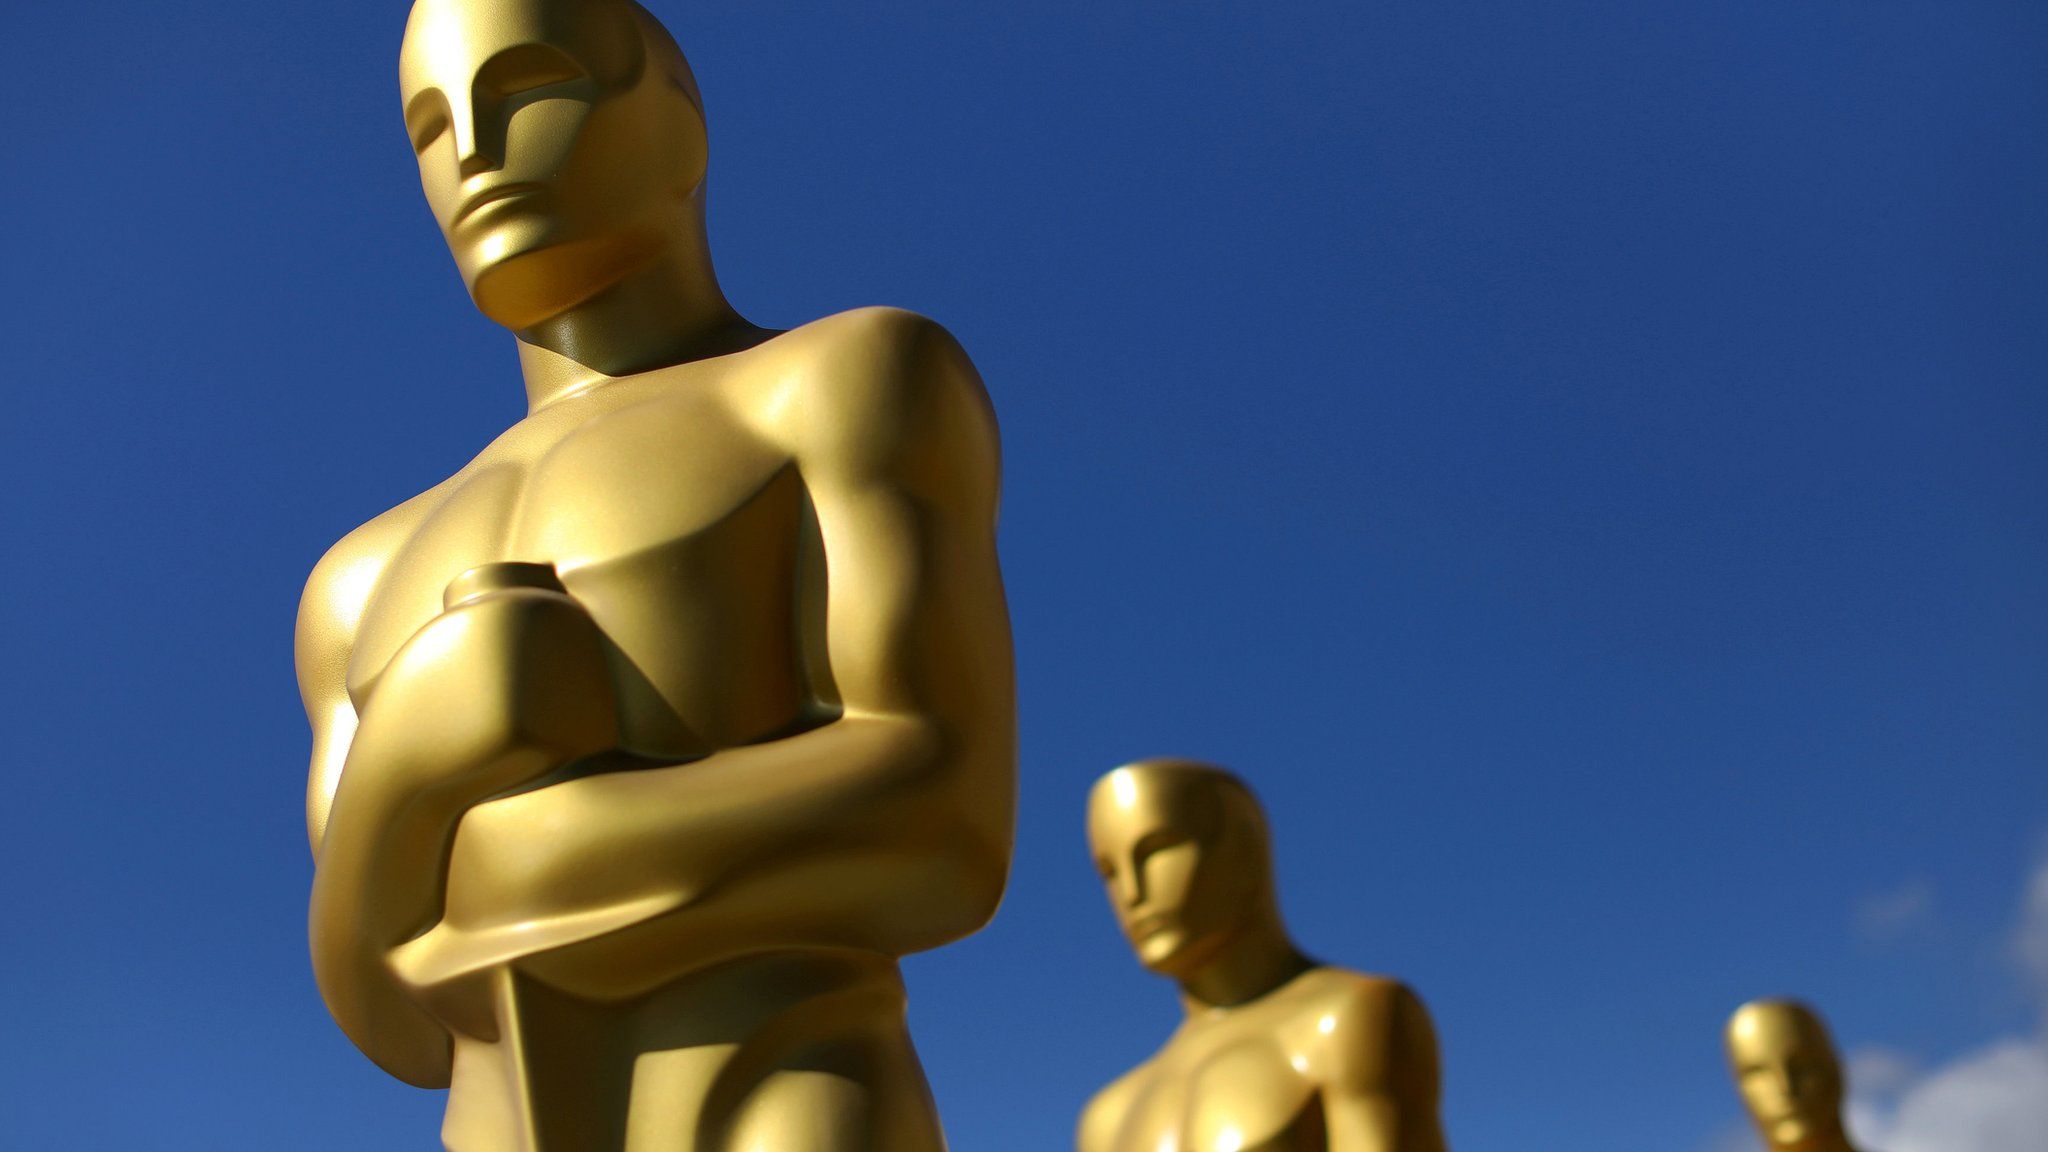 Oscar statues dry in the sun after receiving a fresh coat of gold paint as preparations begin for the 89th Academy Awards in Hollywood, California, February 22, 2017